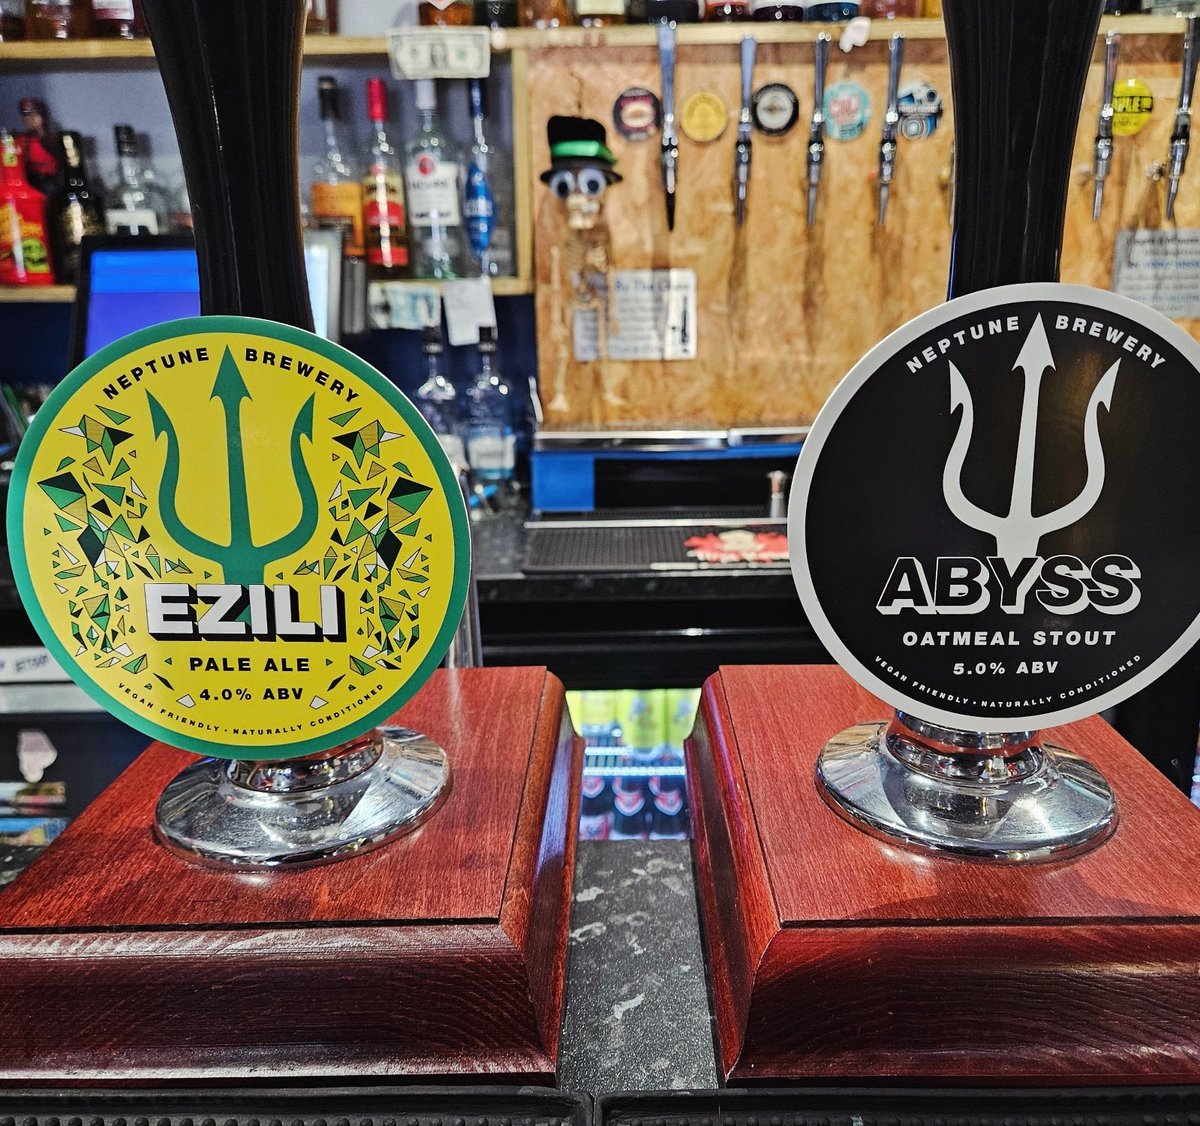 NEW ON CASK

We are now pouring these superb beers from the superb @neptunebrewery

#beer #craftbeer #caskbeer